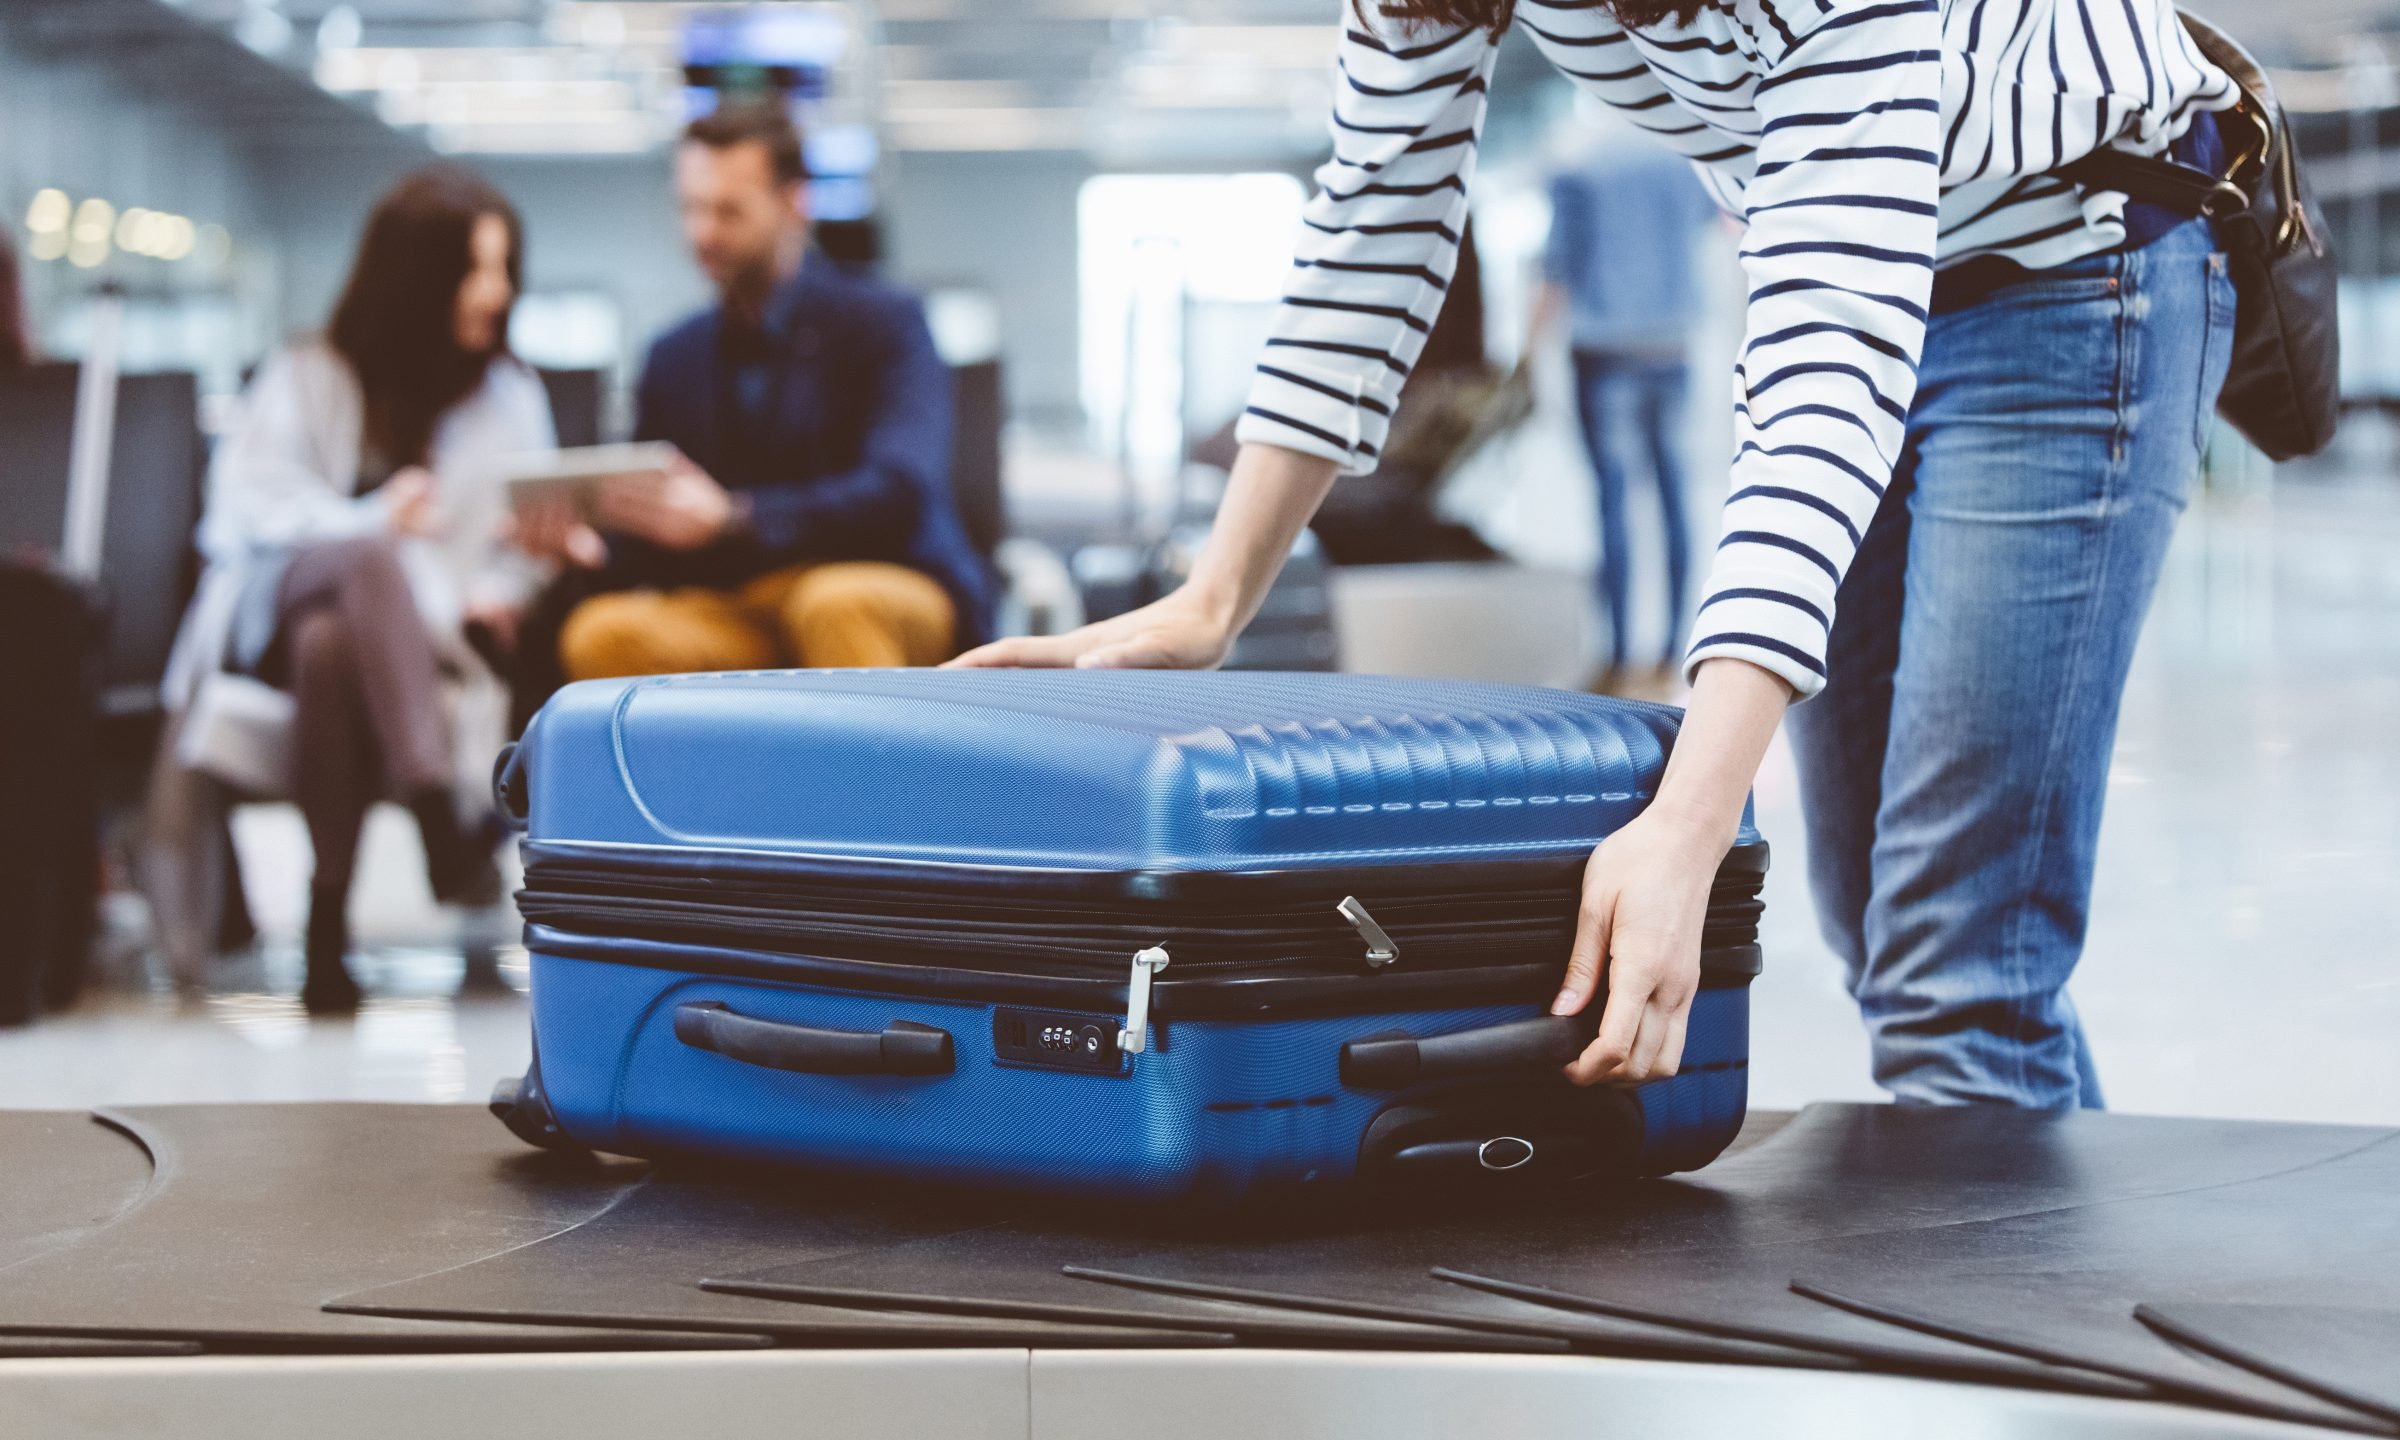 Delta Baggage Allowance and Fees For Carry On & Checked Baggage 2021